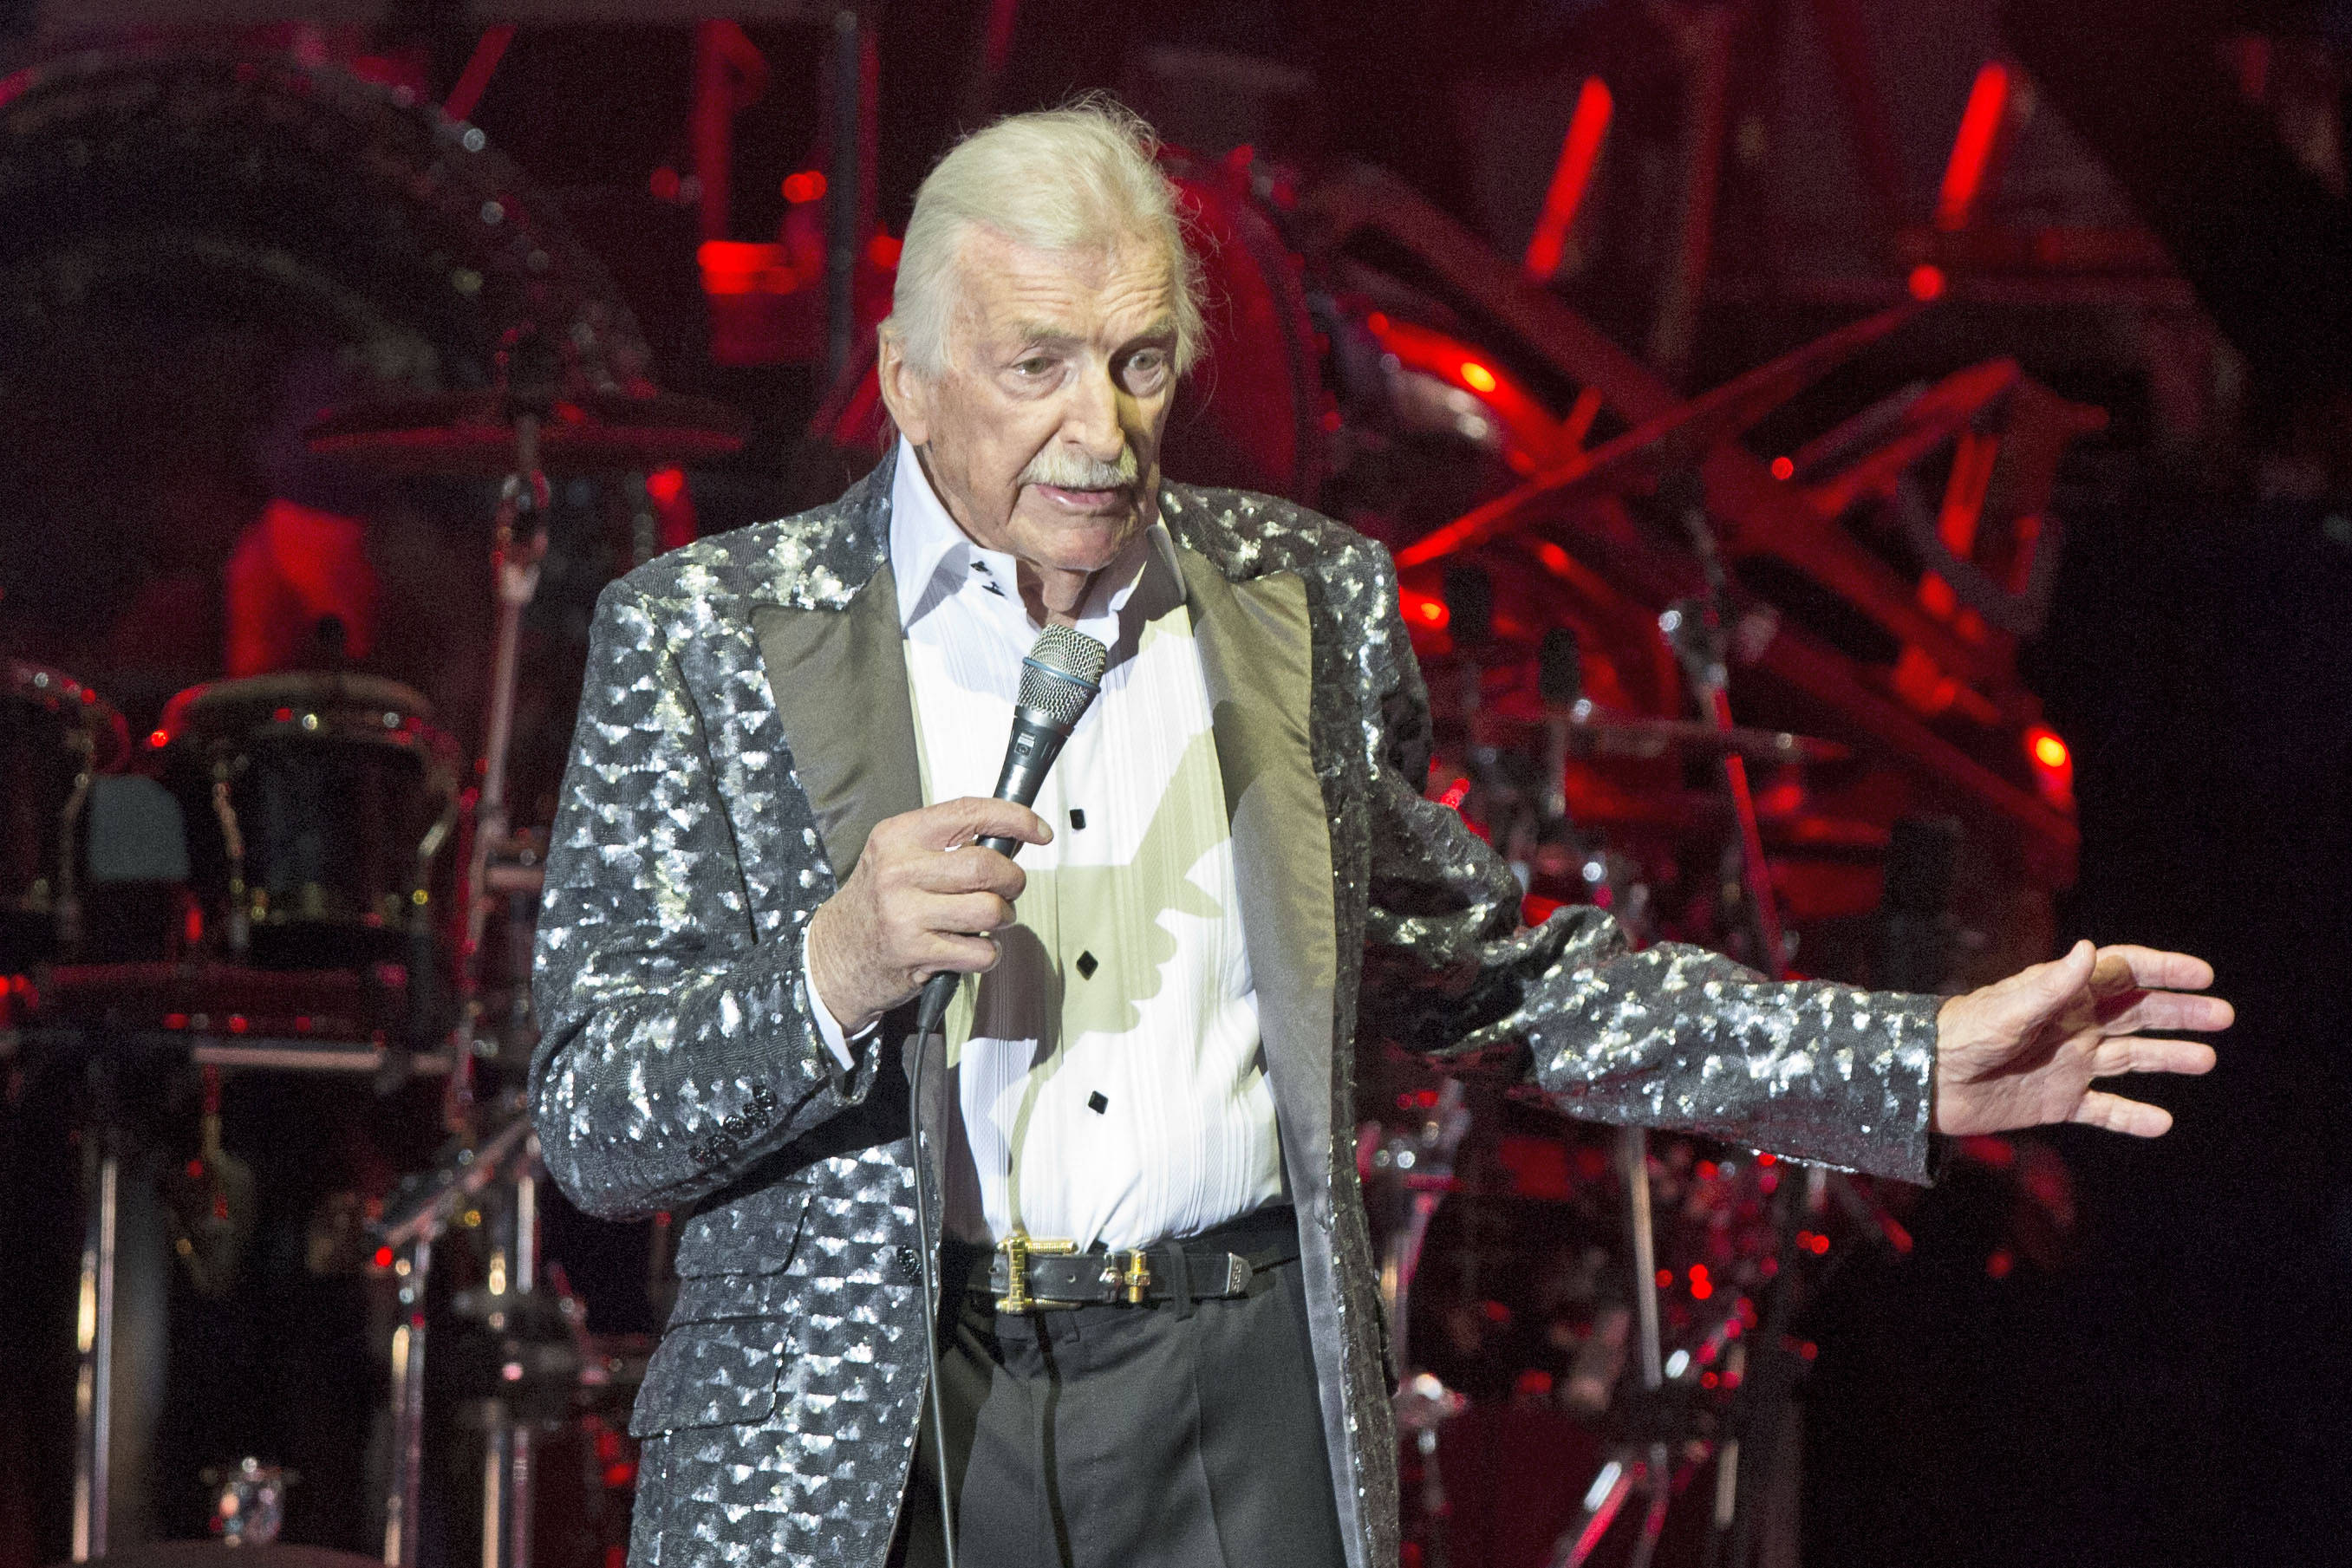 German bandleader and composer James Last performs live during a concert at the O2 World on April 18, 2015 in Berlin, Germany.